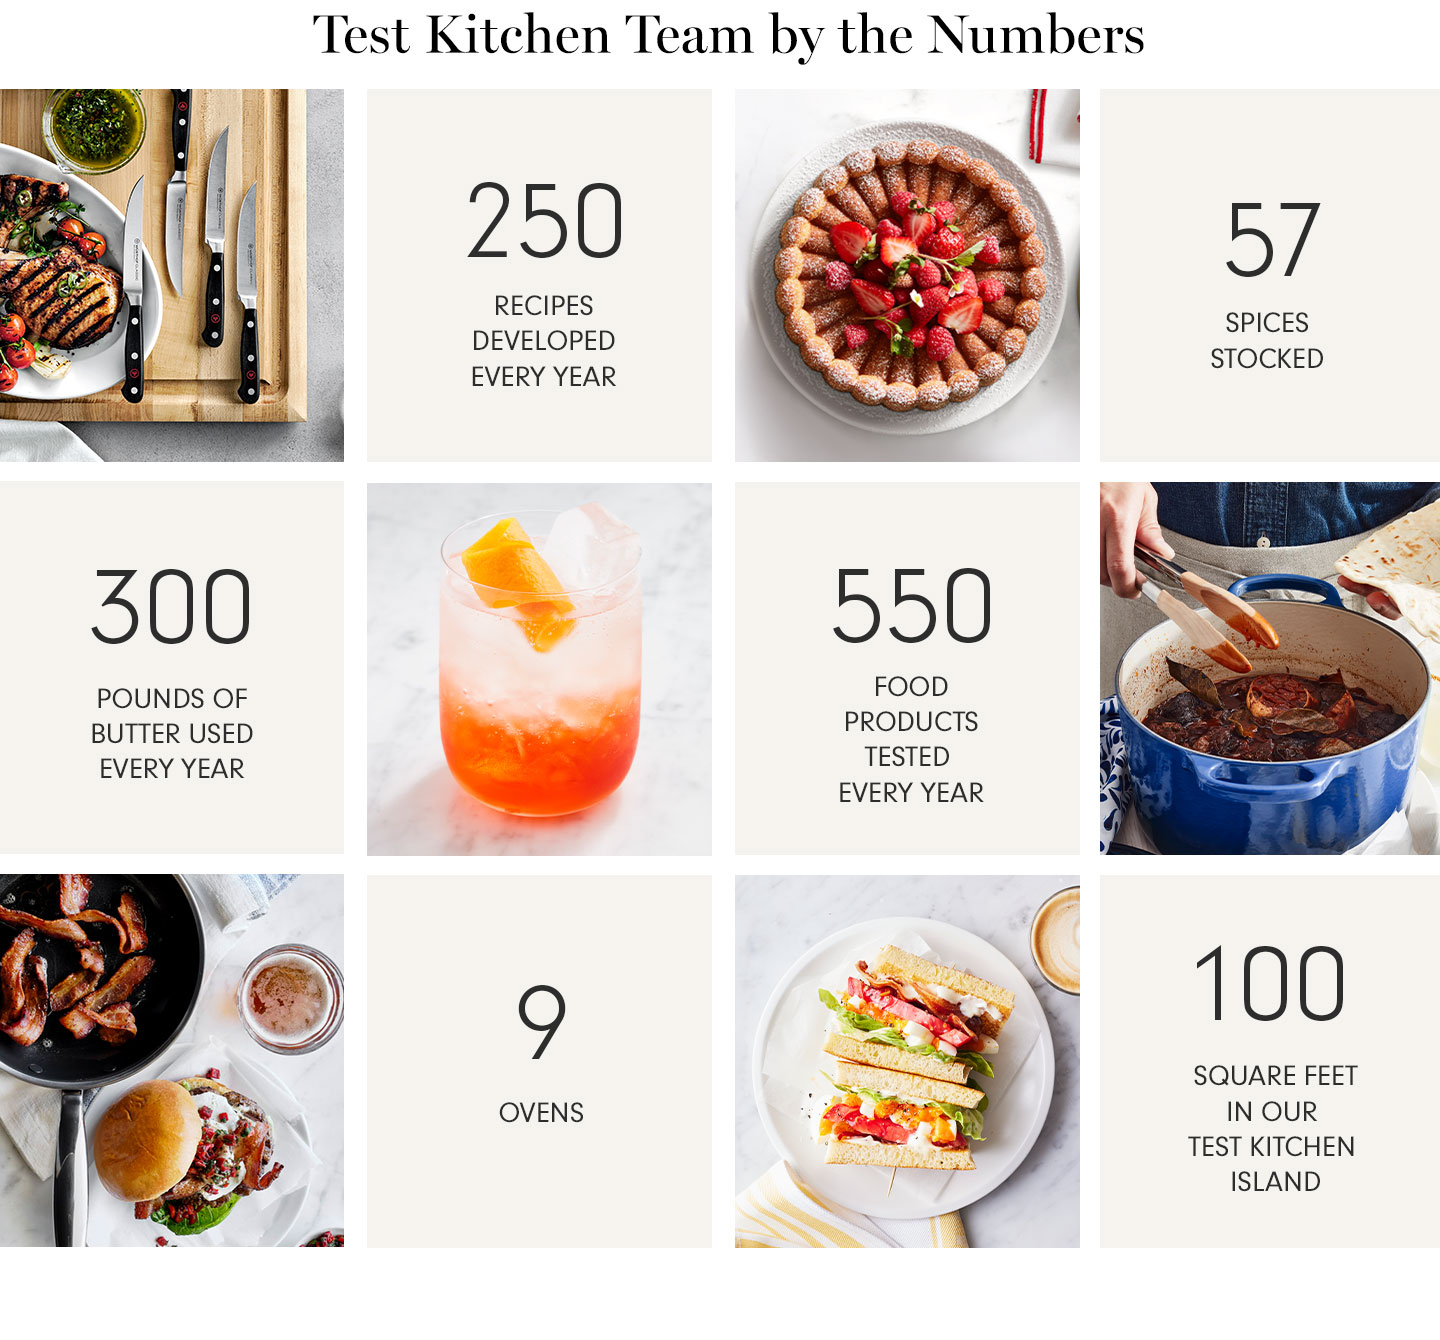 Test Kitchen Team by the Numbers